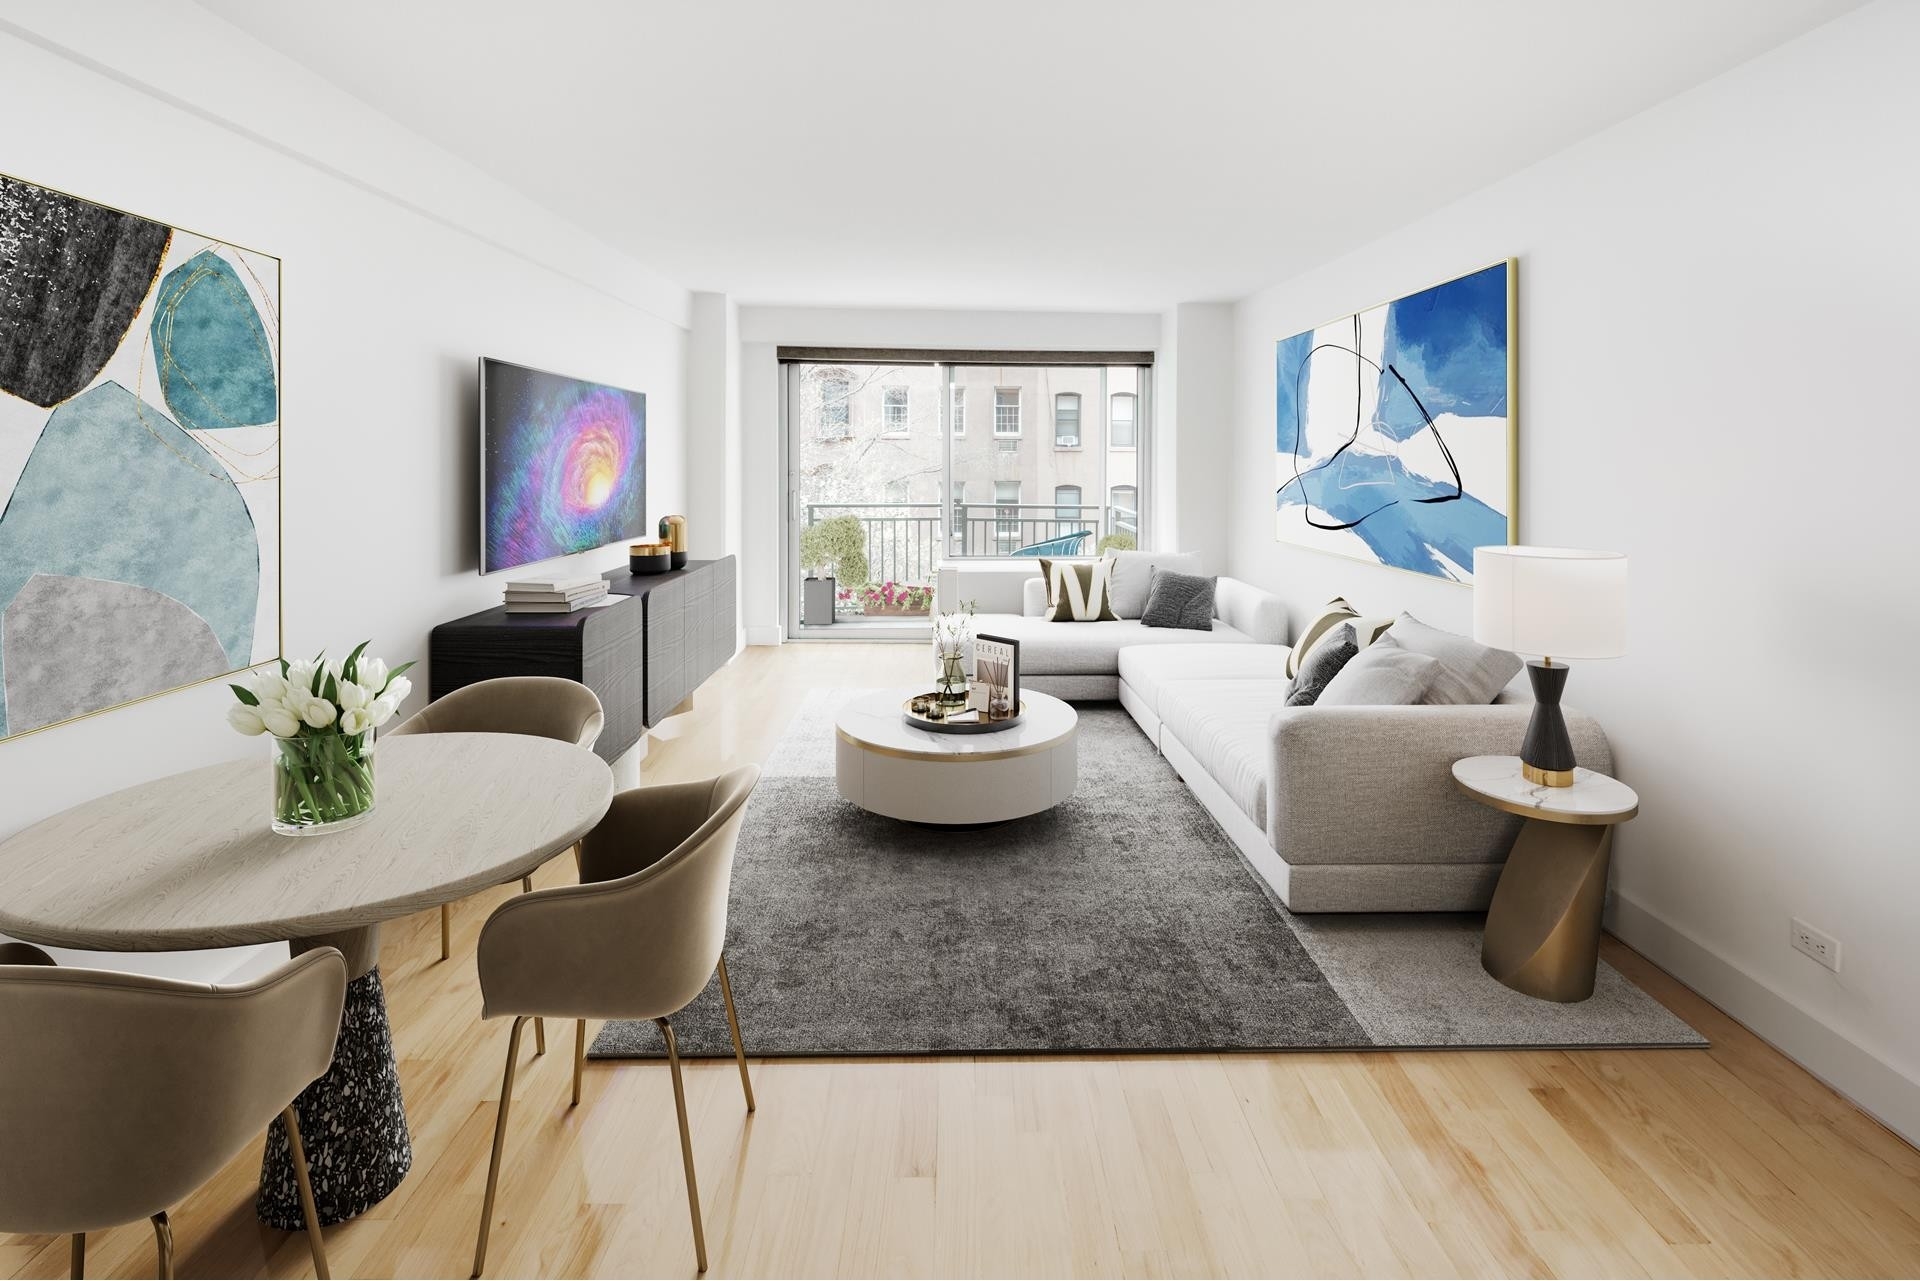 Co-op Properties for Sale at Murray Hill House, 132 E 35TH ST, 4B Murray Hill, New York, NY 10016